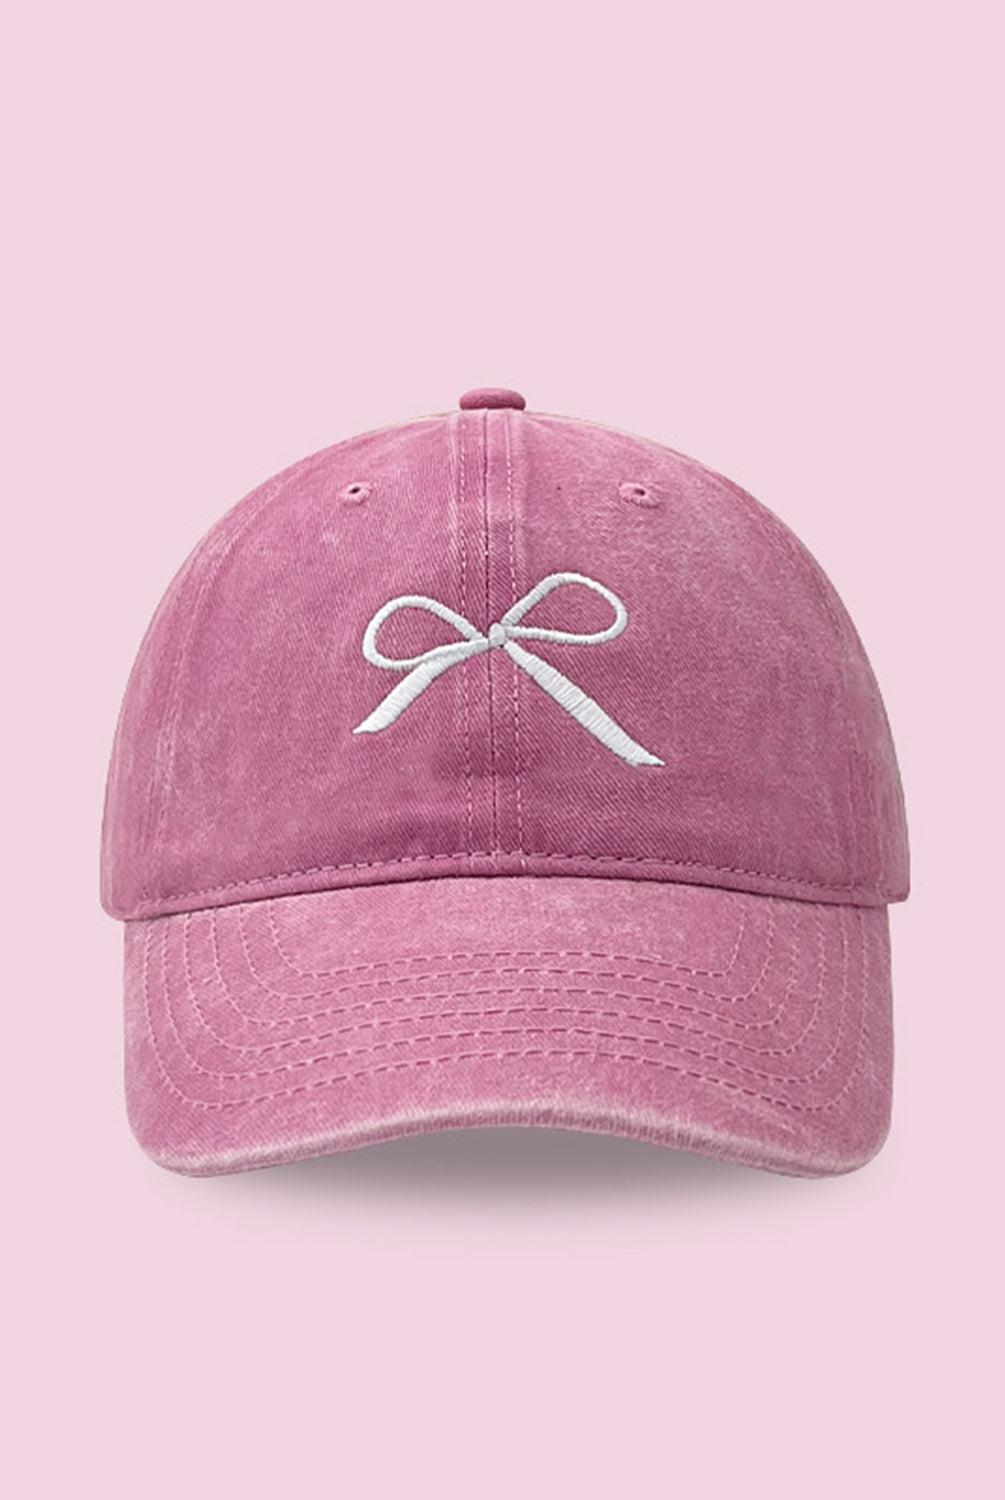 Bow Embroidered Adjustable Cap - GemThreads Boutique Bow Embroidered Adjustable Cap